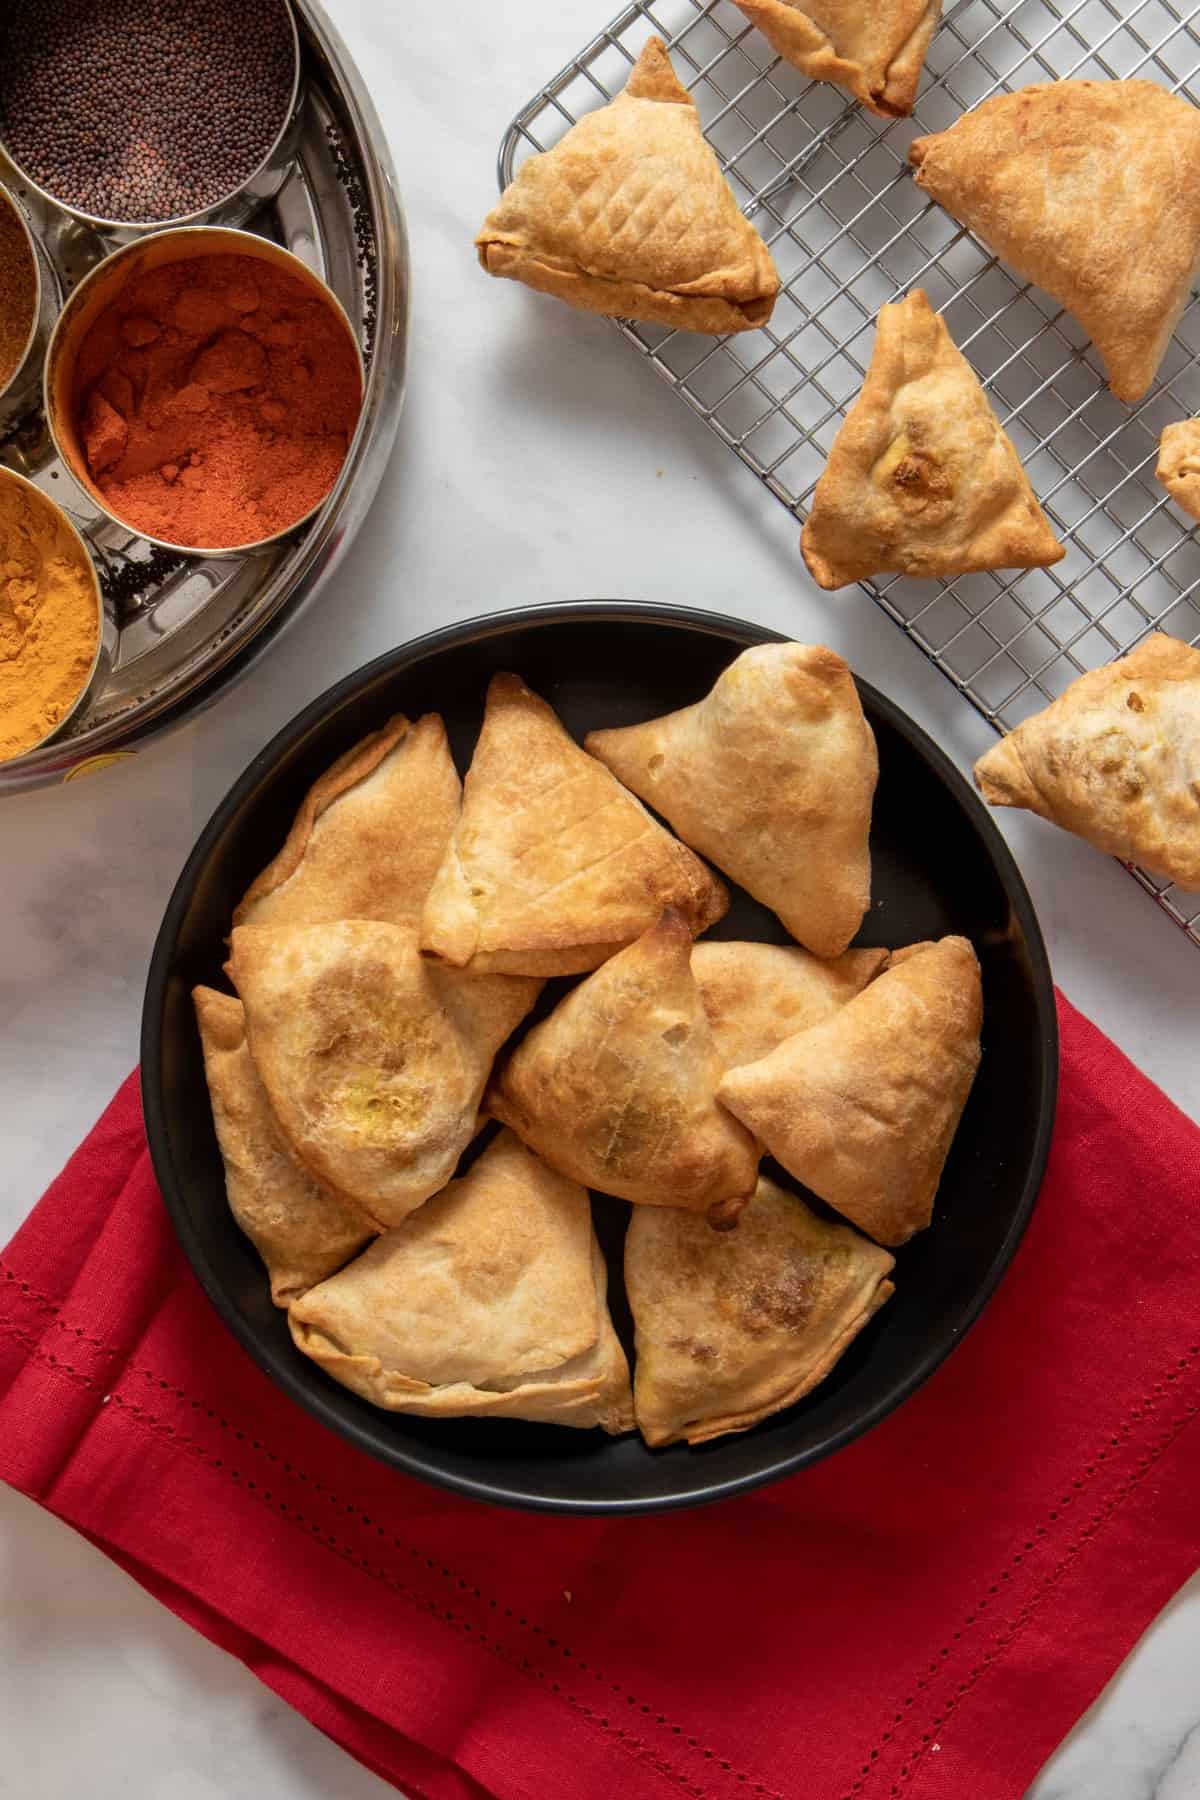 Recipes for baking and air frying samosas for a healthier snack